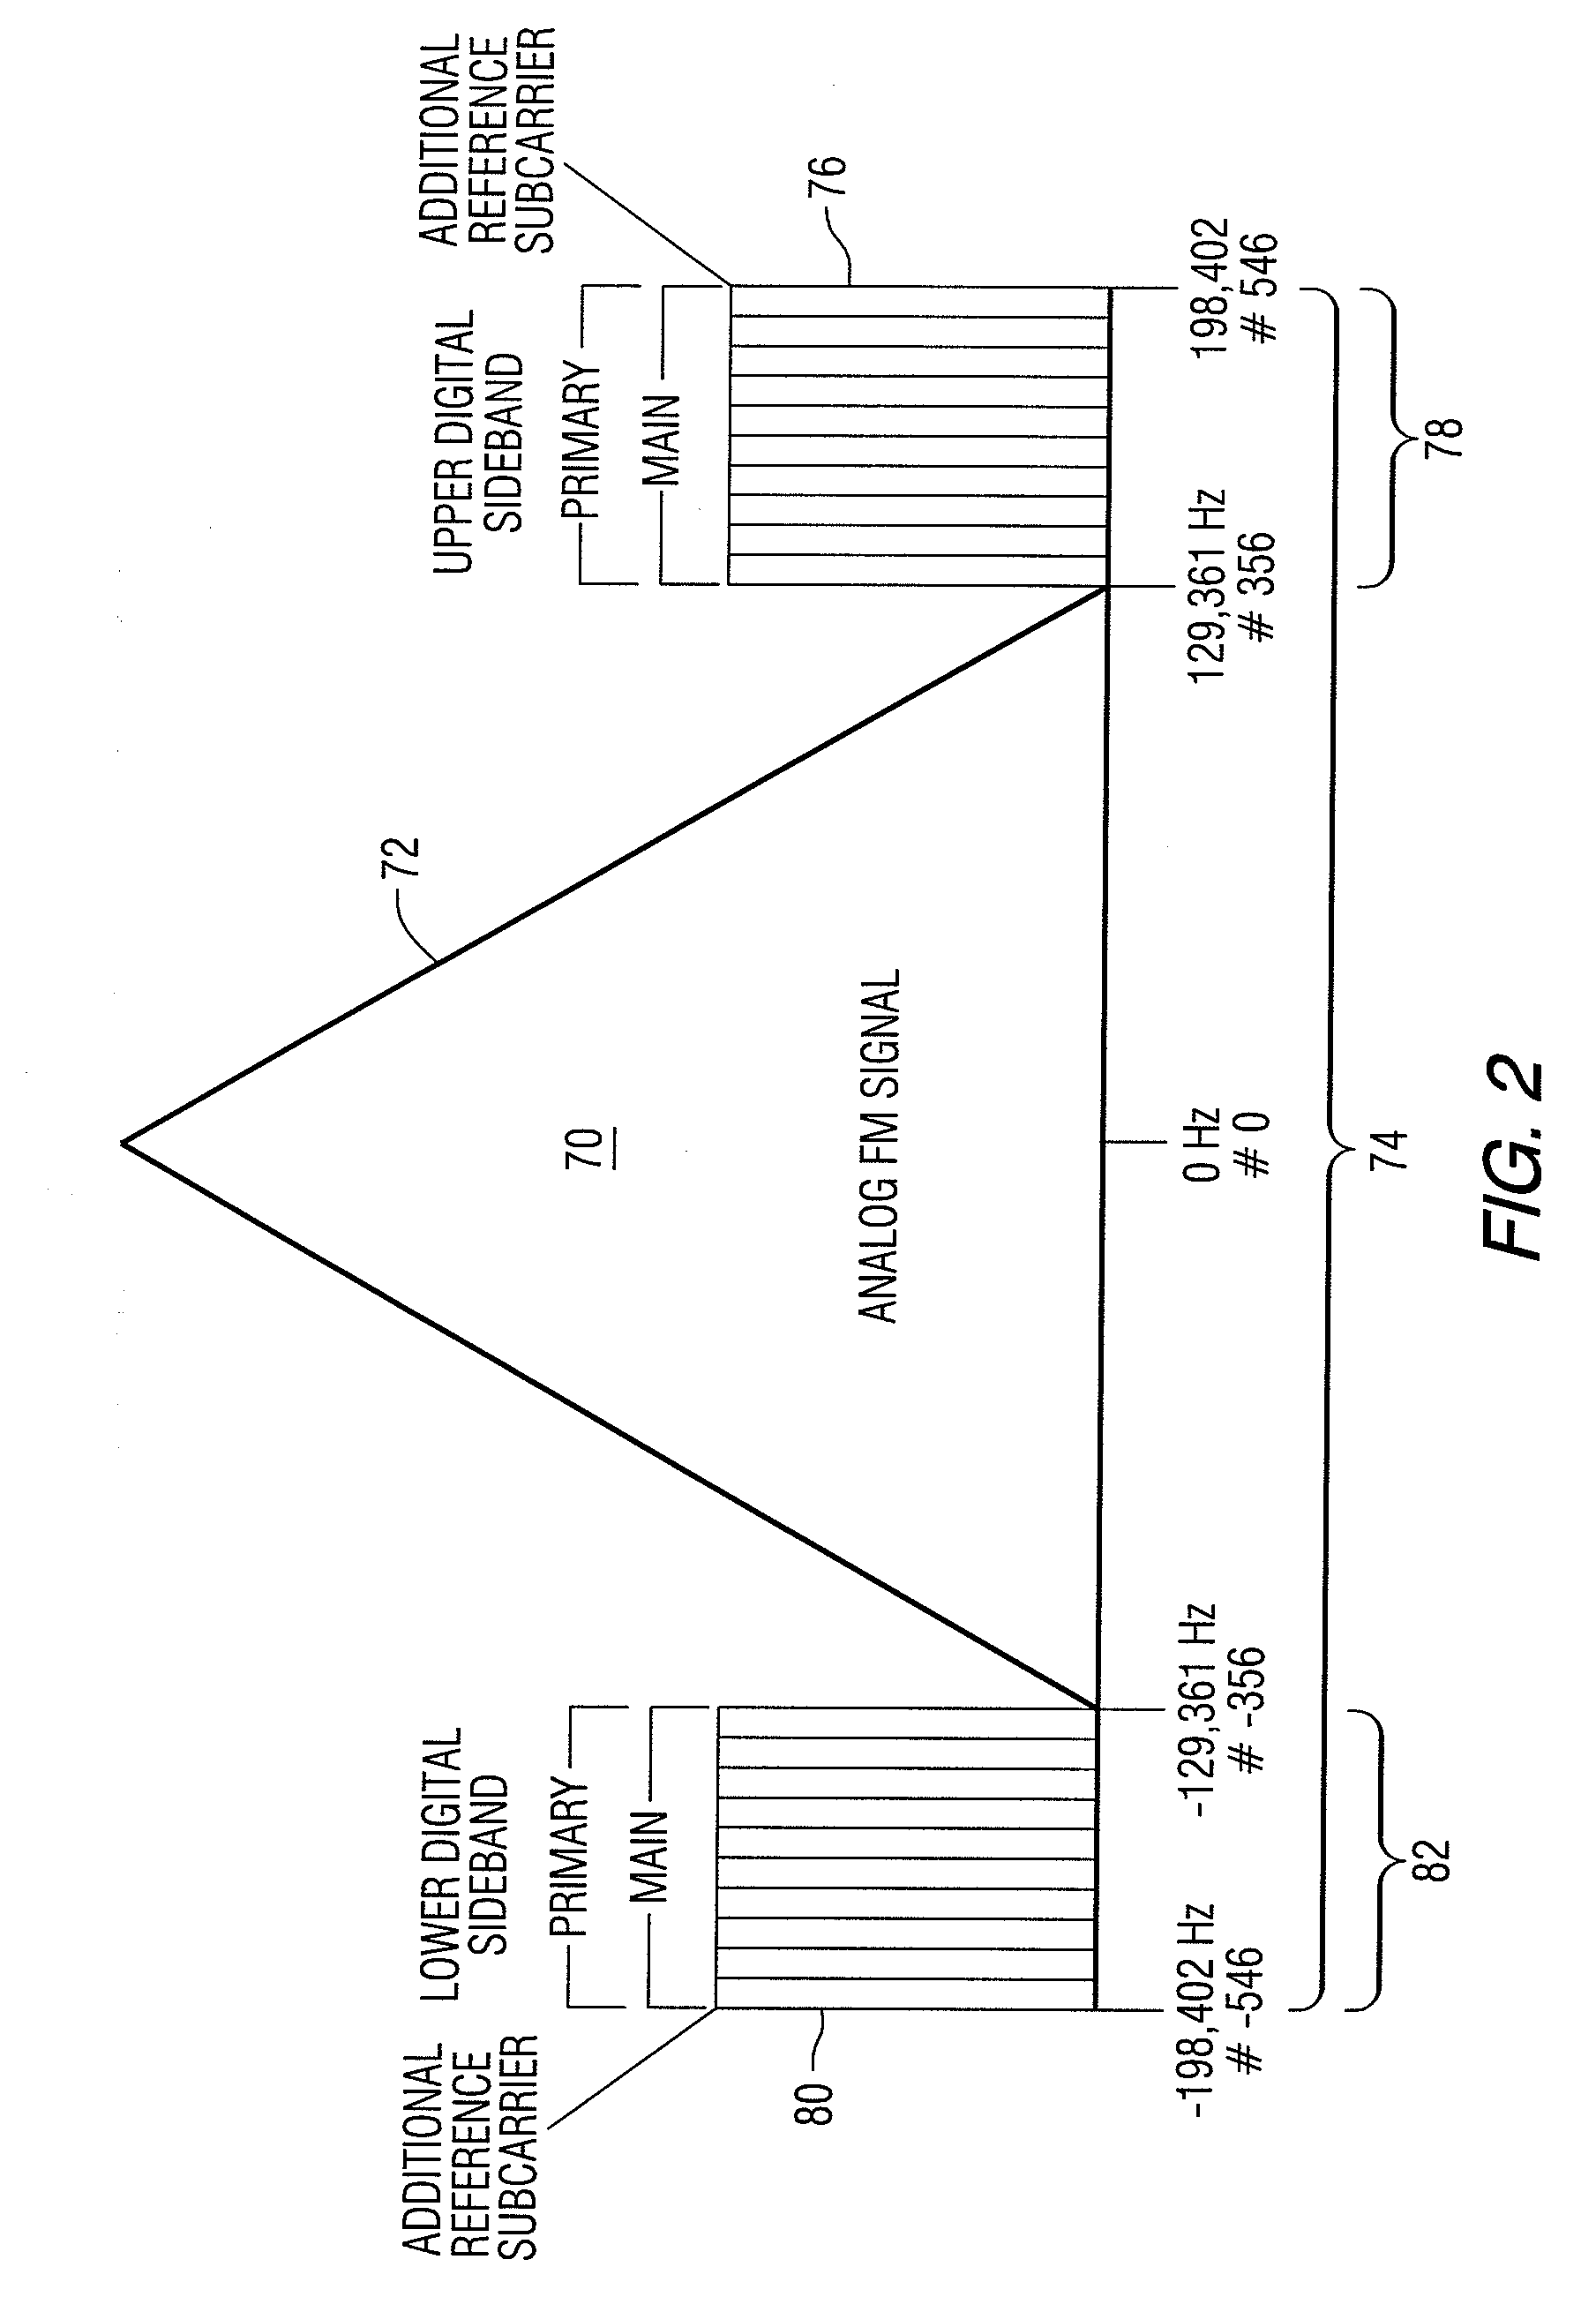 Method and Apparatus for Implementing Seek and Scan Functions for an FM Digital Radio Signal